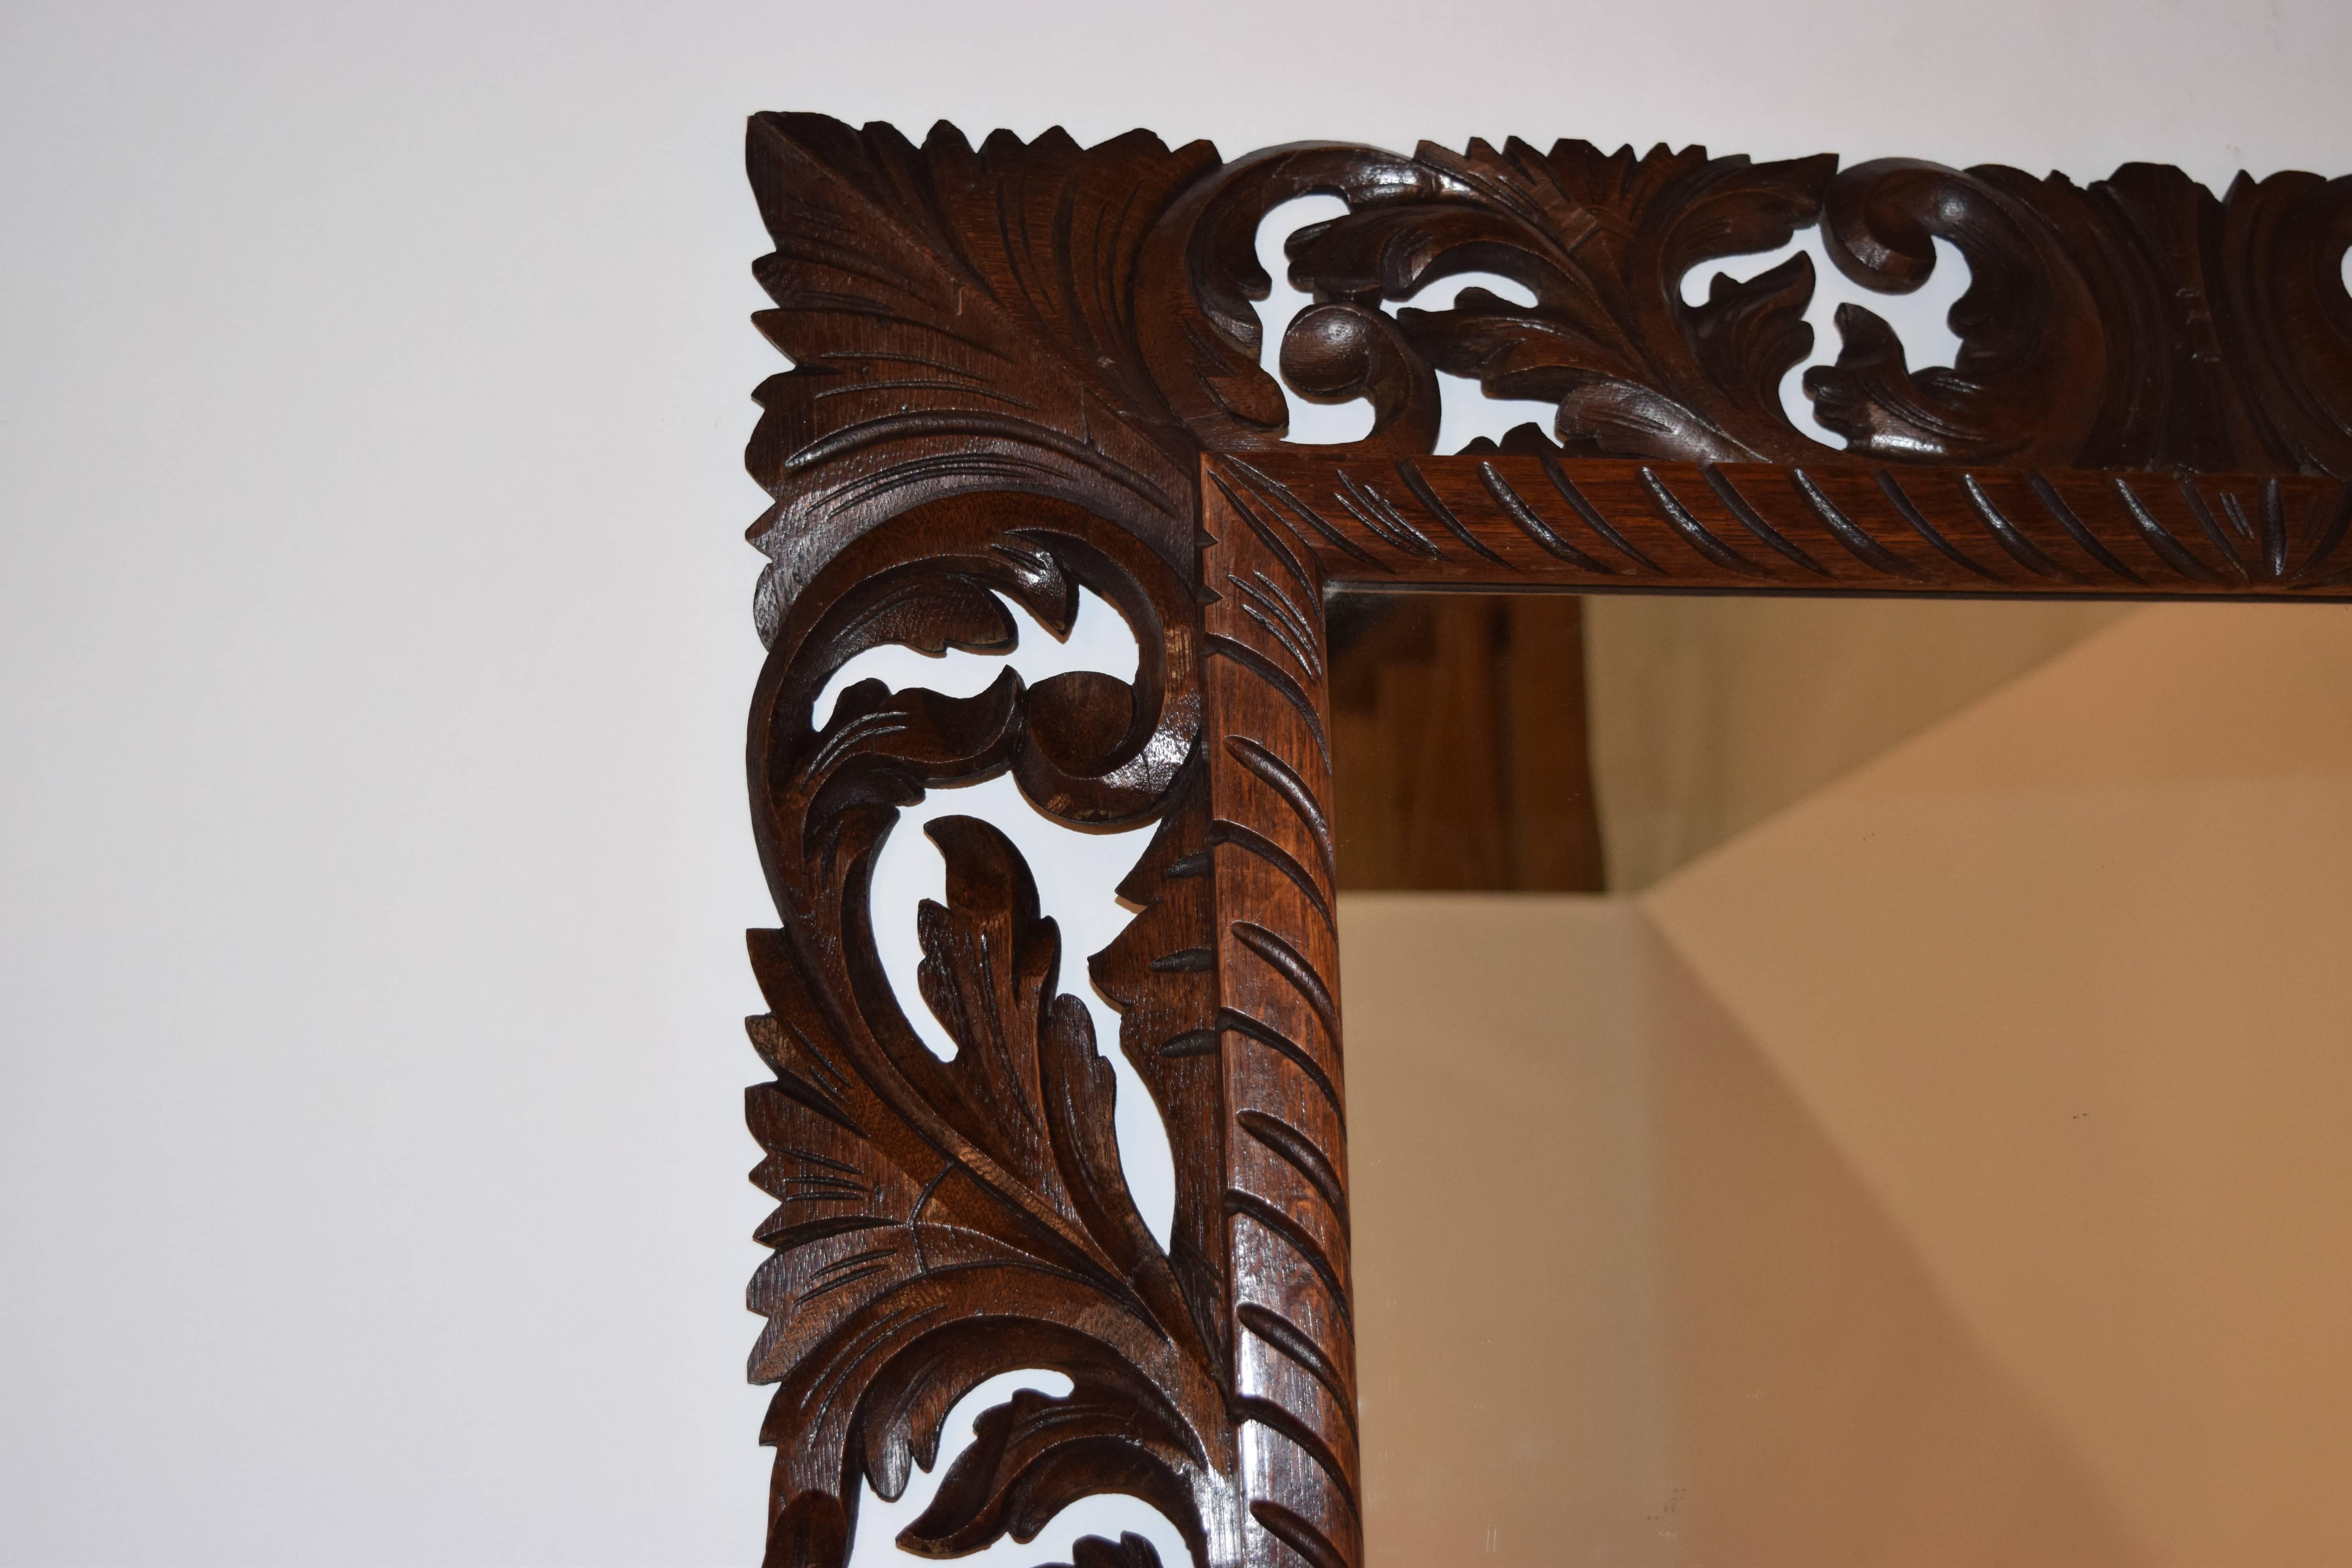 19th century English oak carved mirror with hand-carved leaves and scrolls.
 